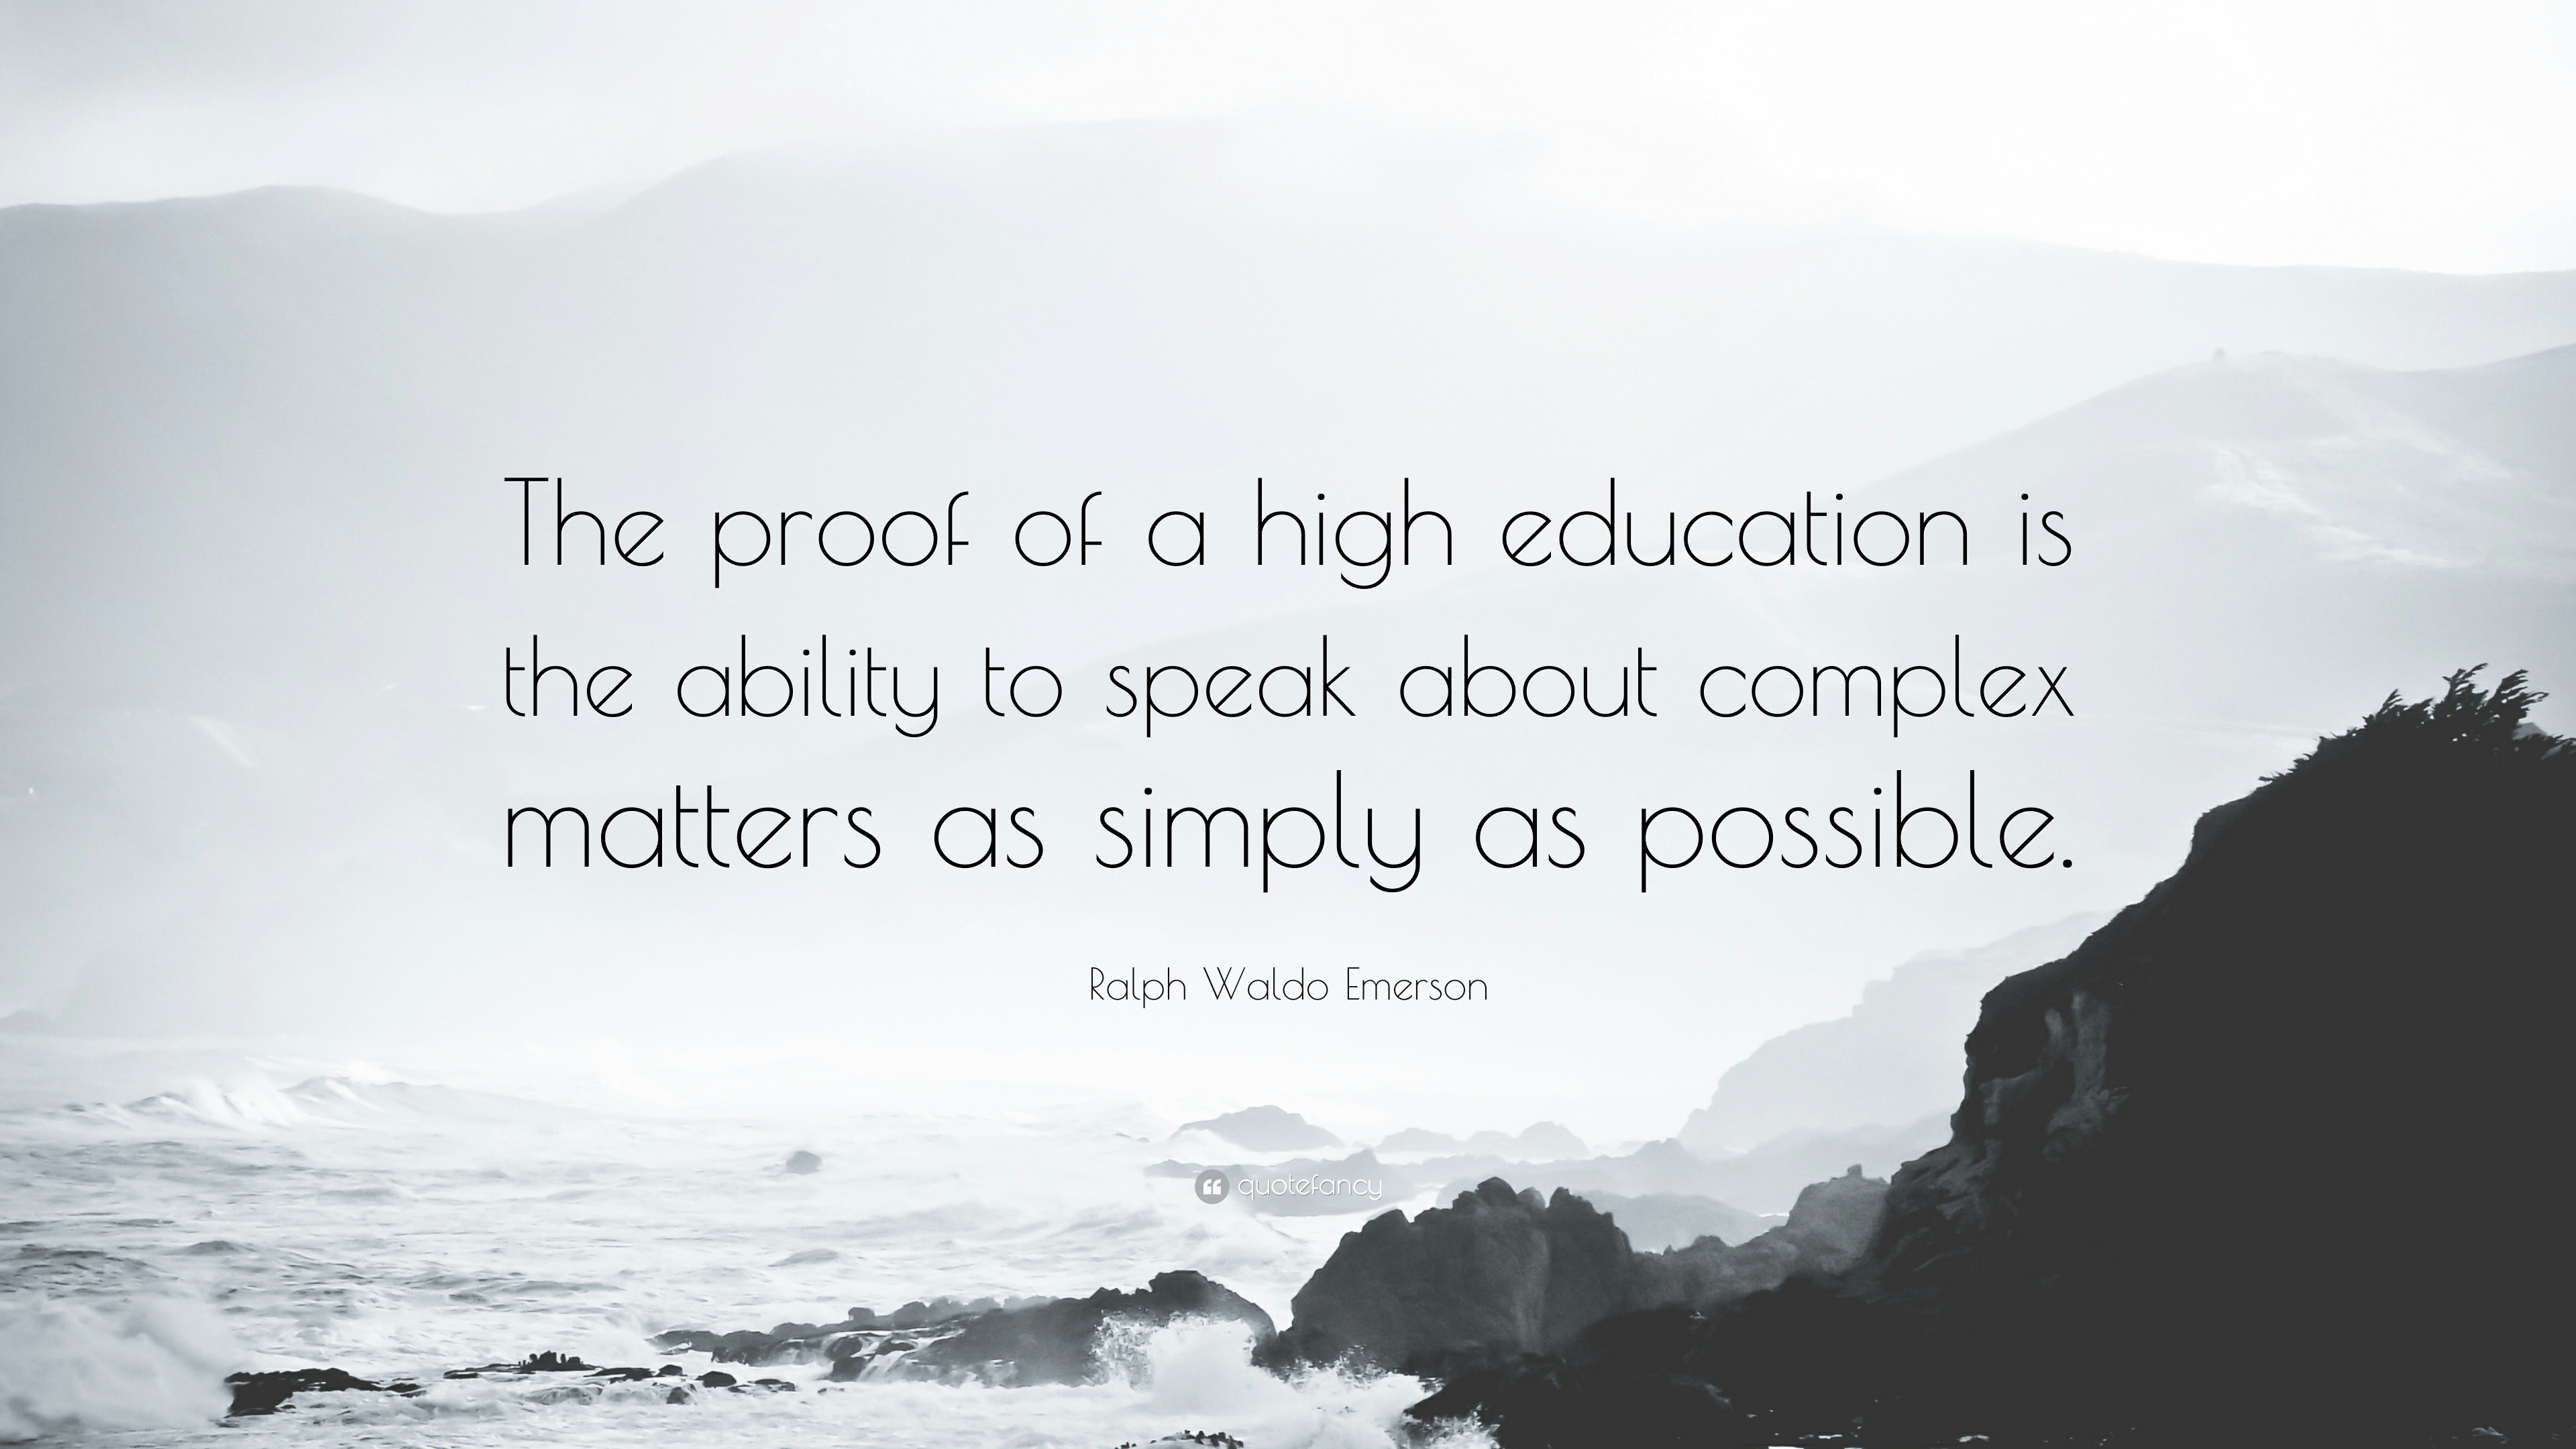 Ralph Waldo Emerson Quote: “The Proof Of A High Education Is The Ability To Speak About